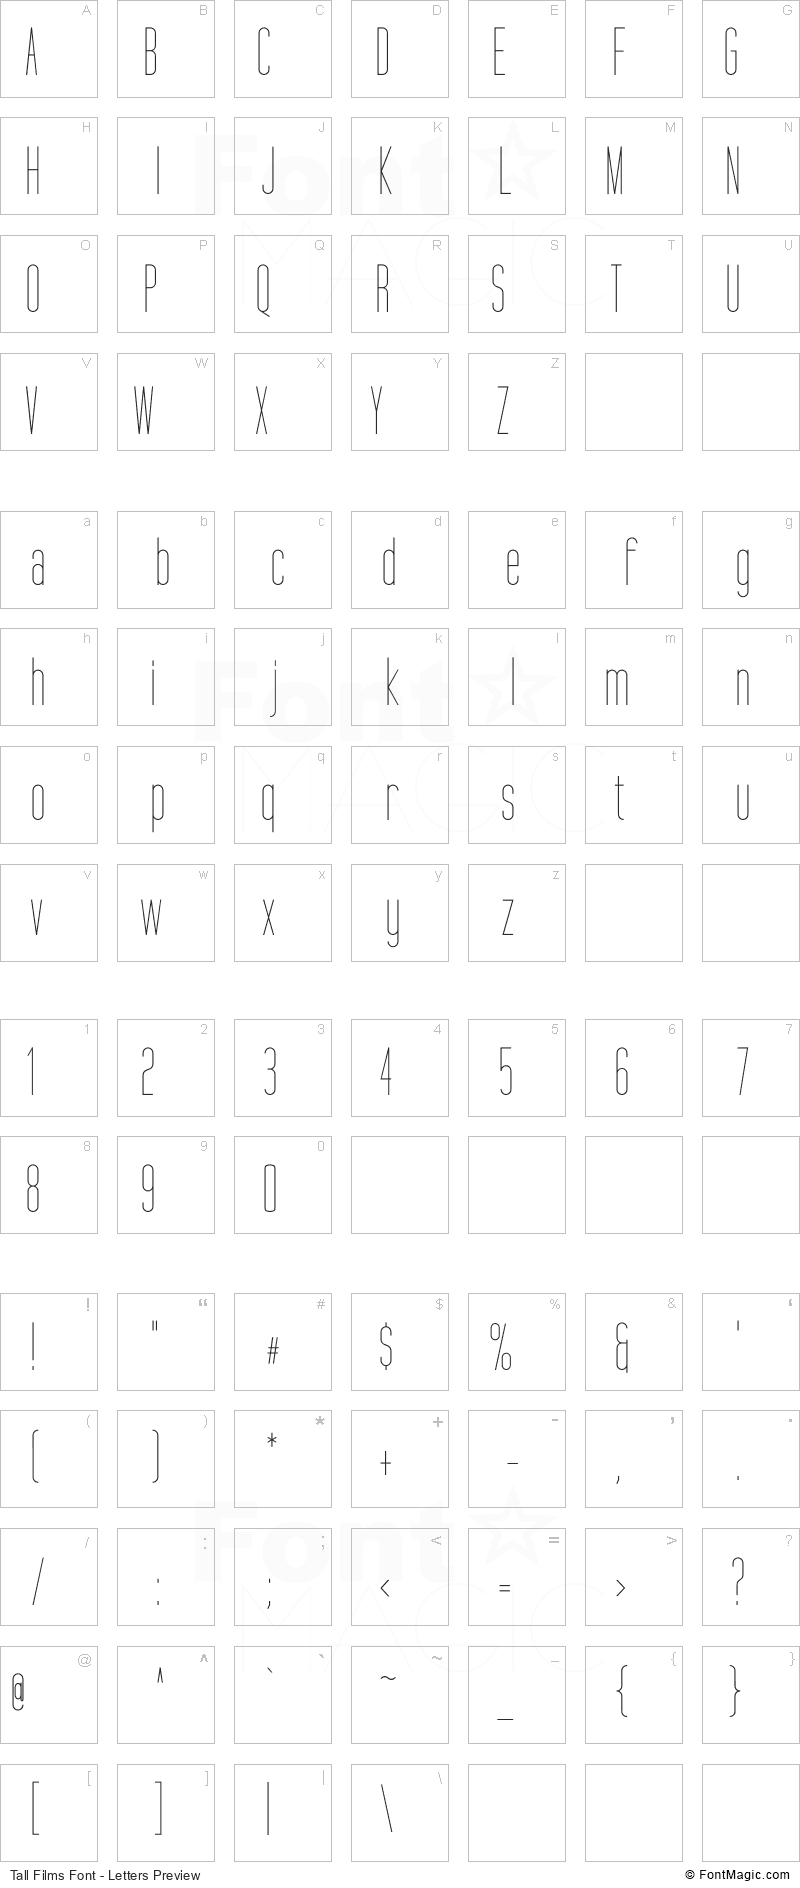 Tall Films Font - All Latters Preview Chart